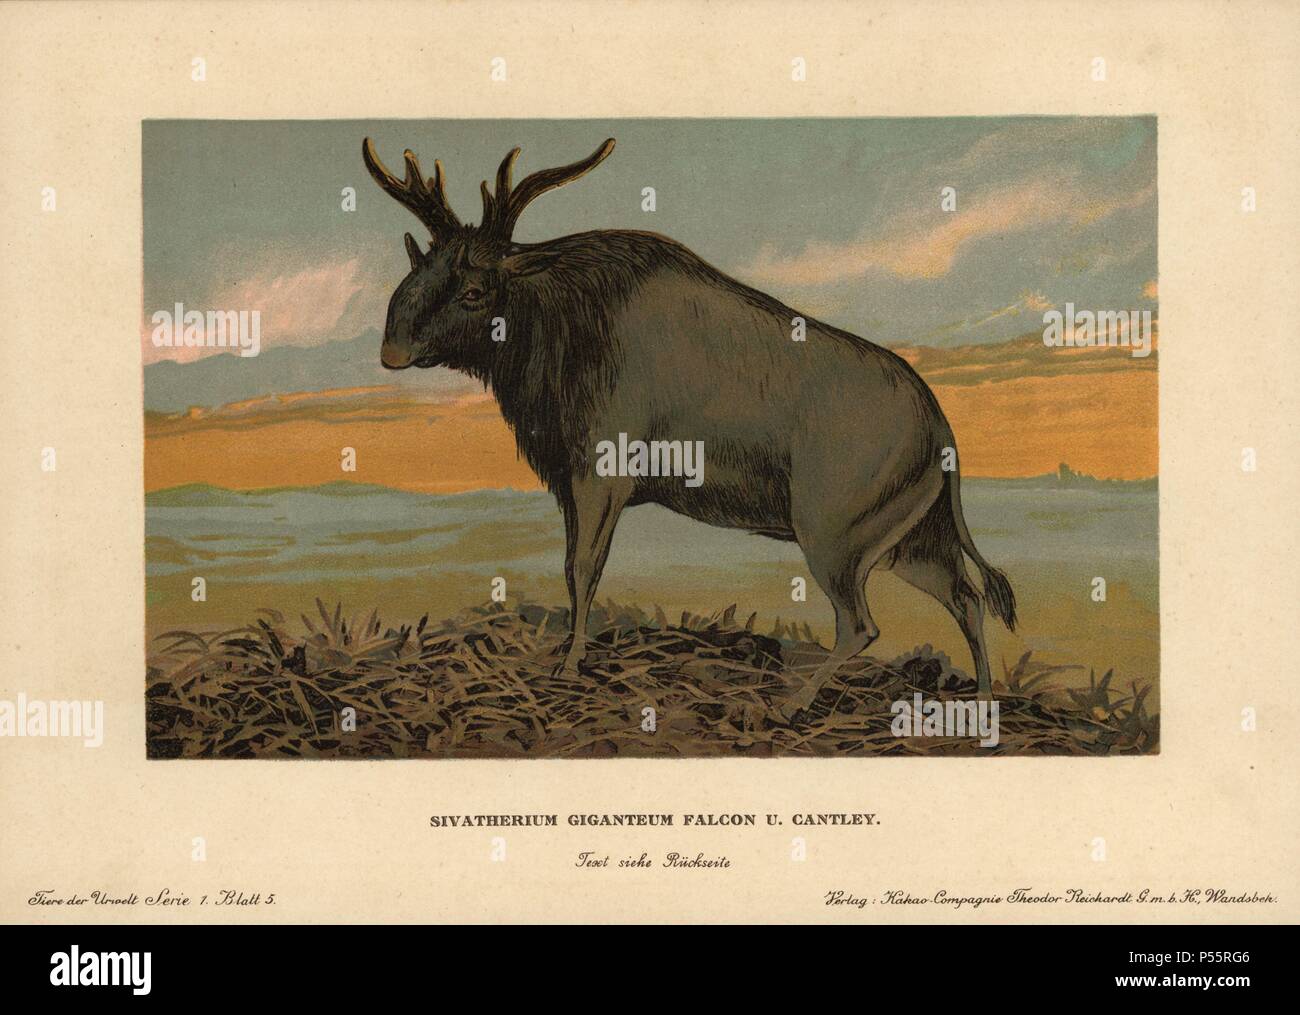 Sivatherium, Sivatherium giganteum, extinct genus of giraffid. Colour printed (chromolithograph) illustration by F. John from 'Tiere der Urwelt' Animals of the Prehistoric World, 1910, Hamburg. From a series of prehistoric creature cards published by the Reichardt Cocoa company. Stock Photo